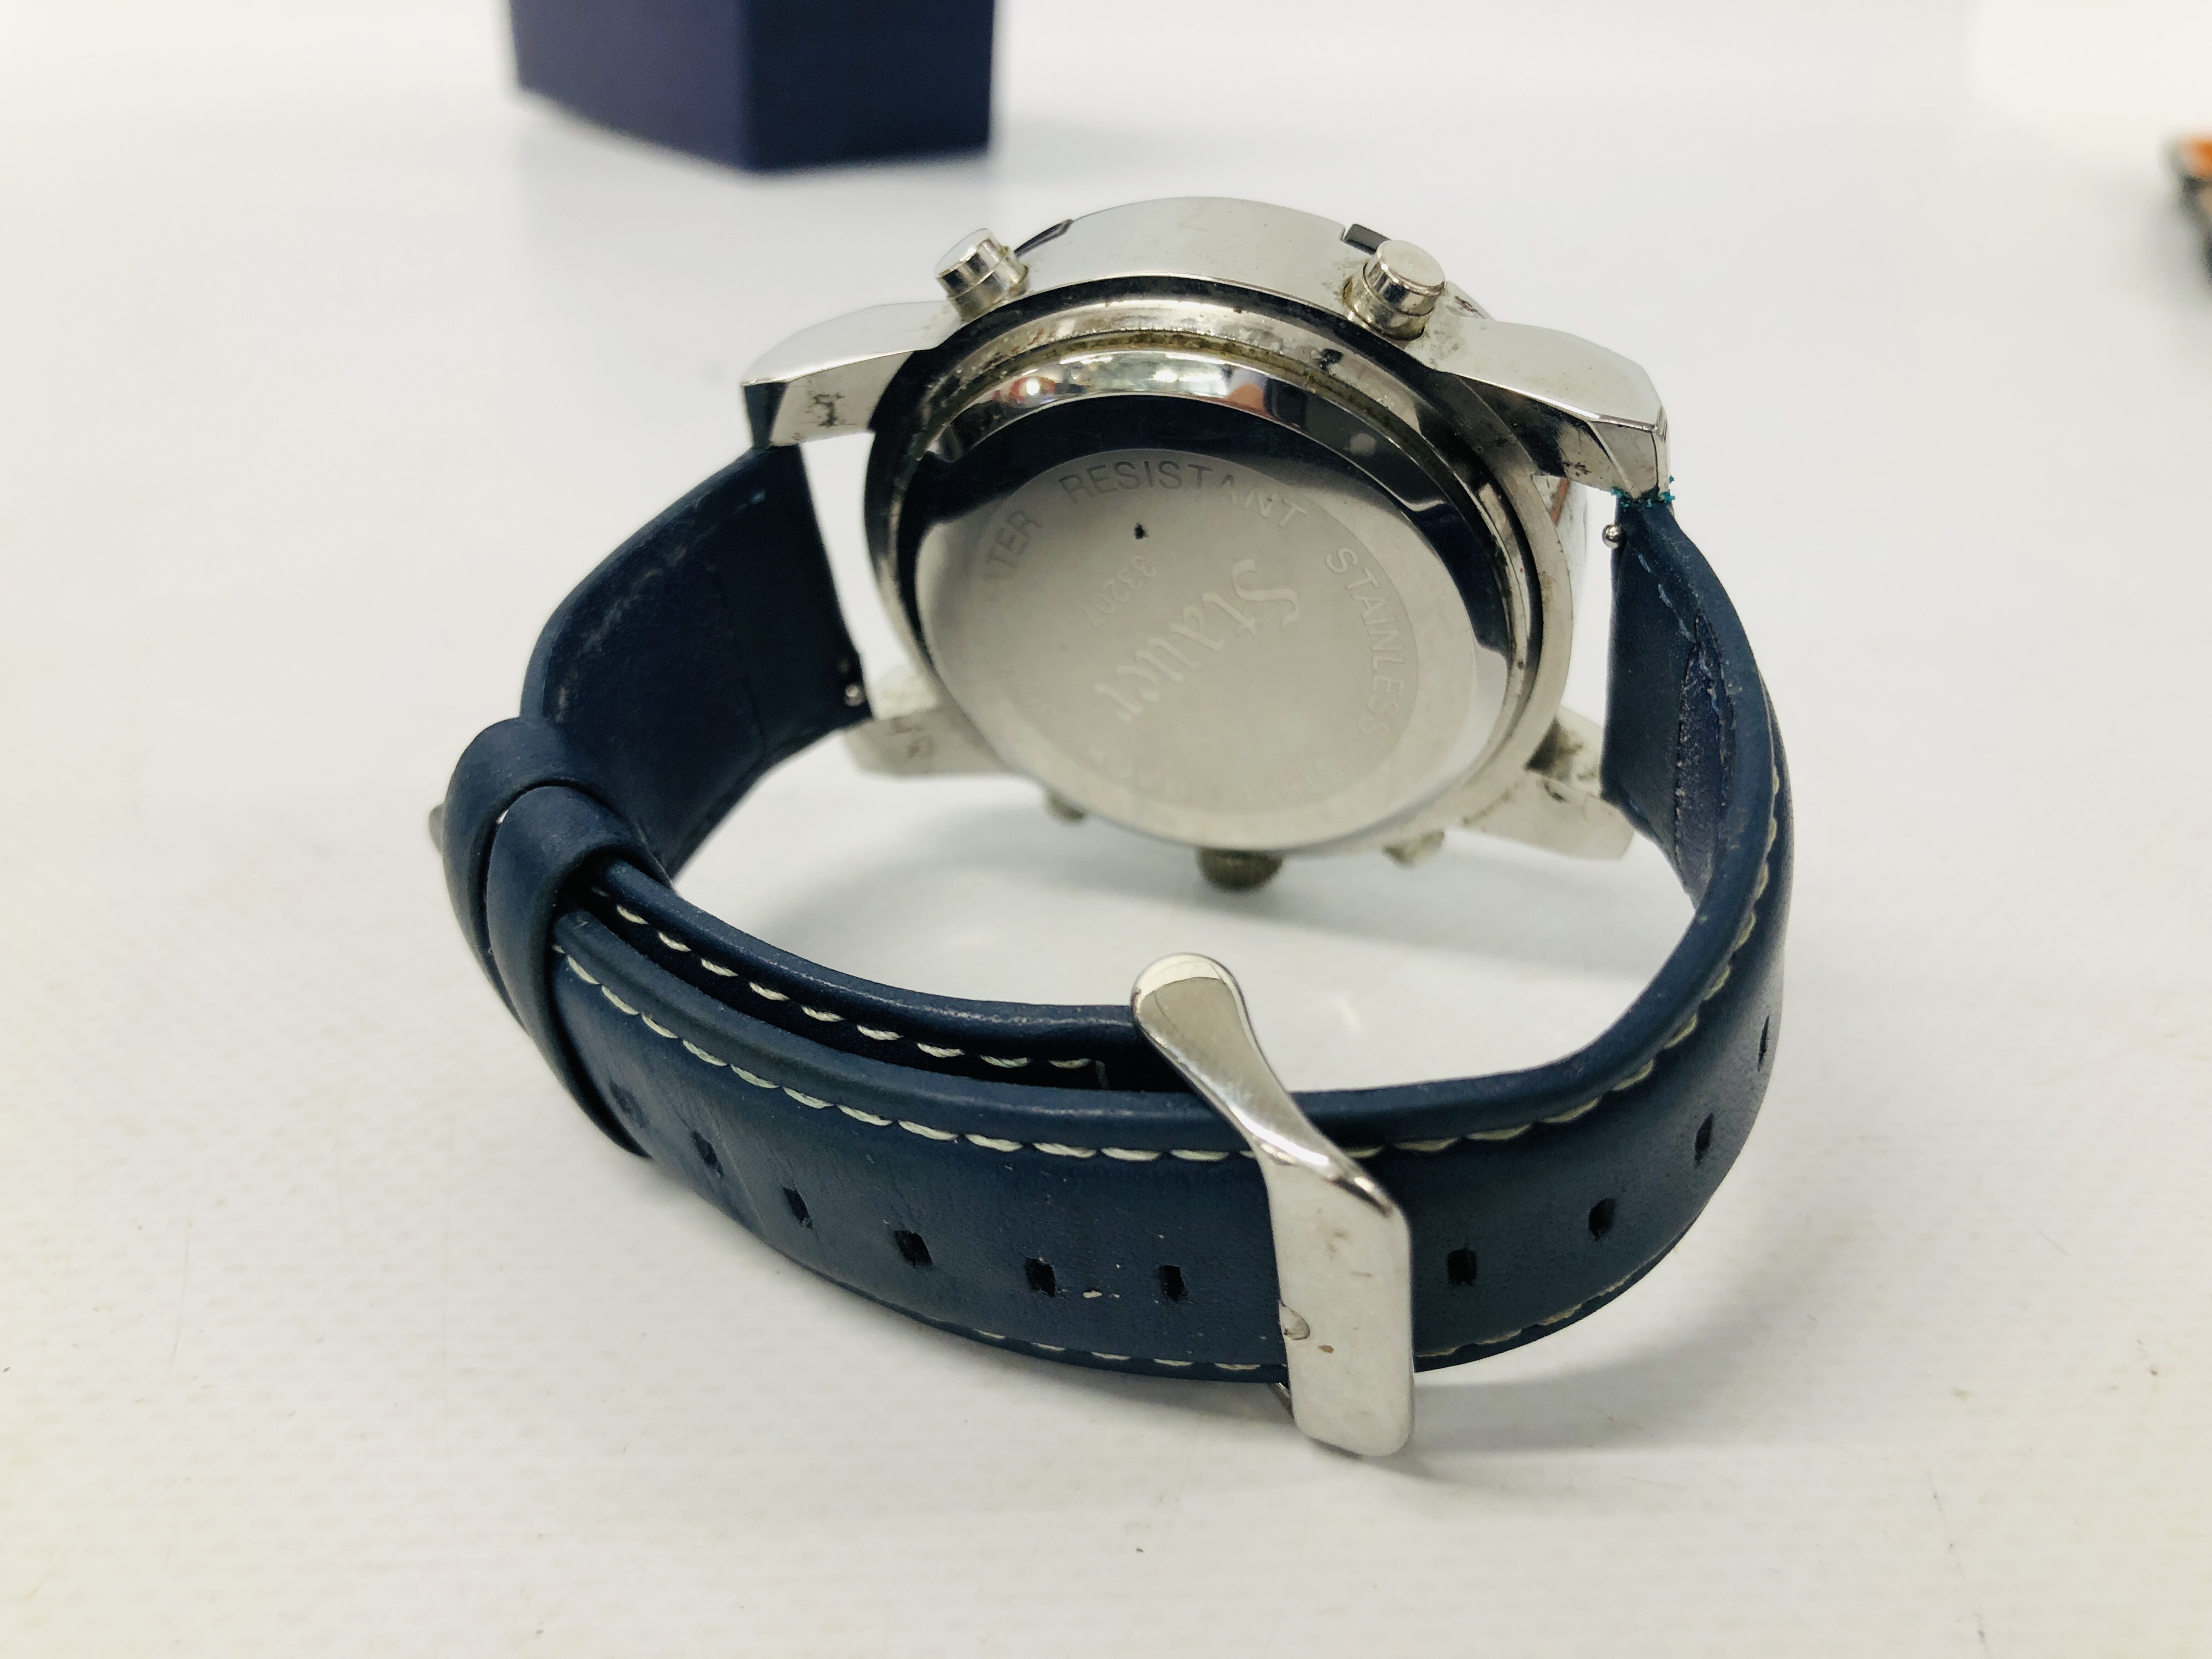 BOXED DESIGNER BRANDED WRIST WATCH MARKED STAUER BLUE STONE CHRONOGRAPH WATCH - Image 5 of 7